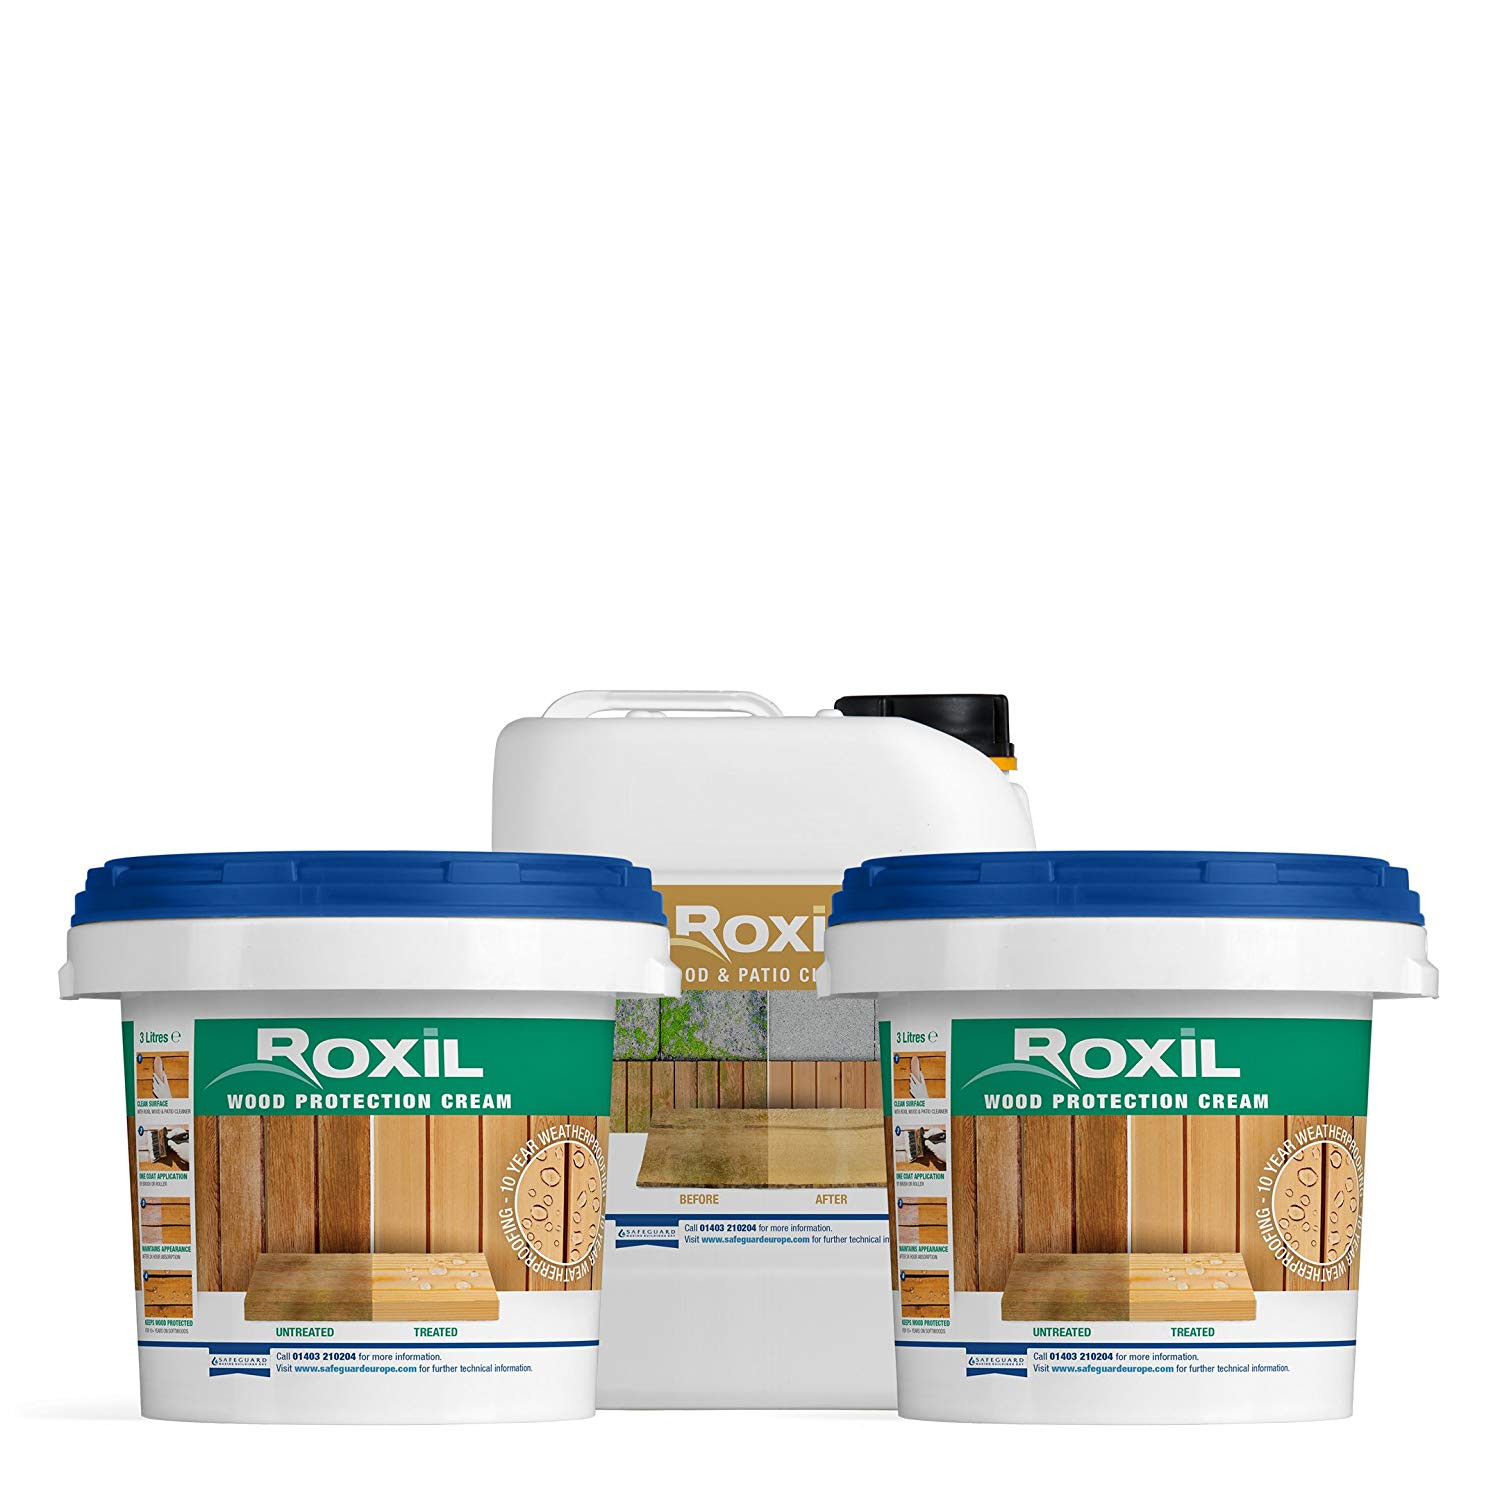 hr hardwood floors of roxil fence panel protection kit 10 year protection from the within roxil fence panel protection kit 10 year protection from the elements amazon co uk garden outdoors